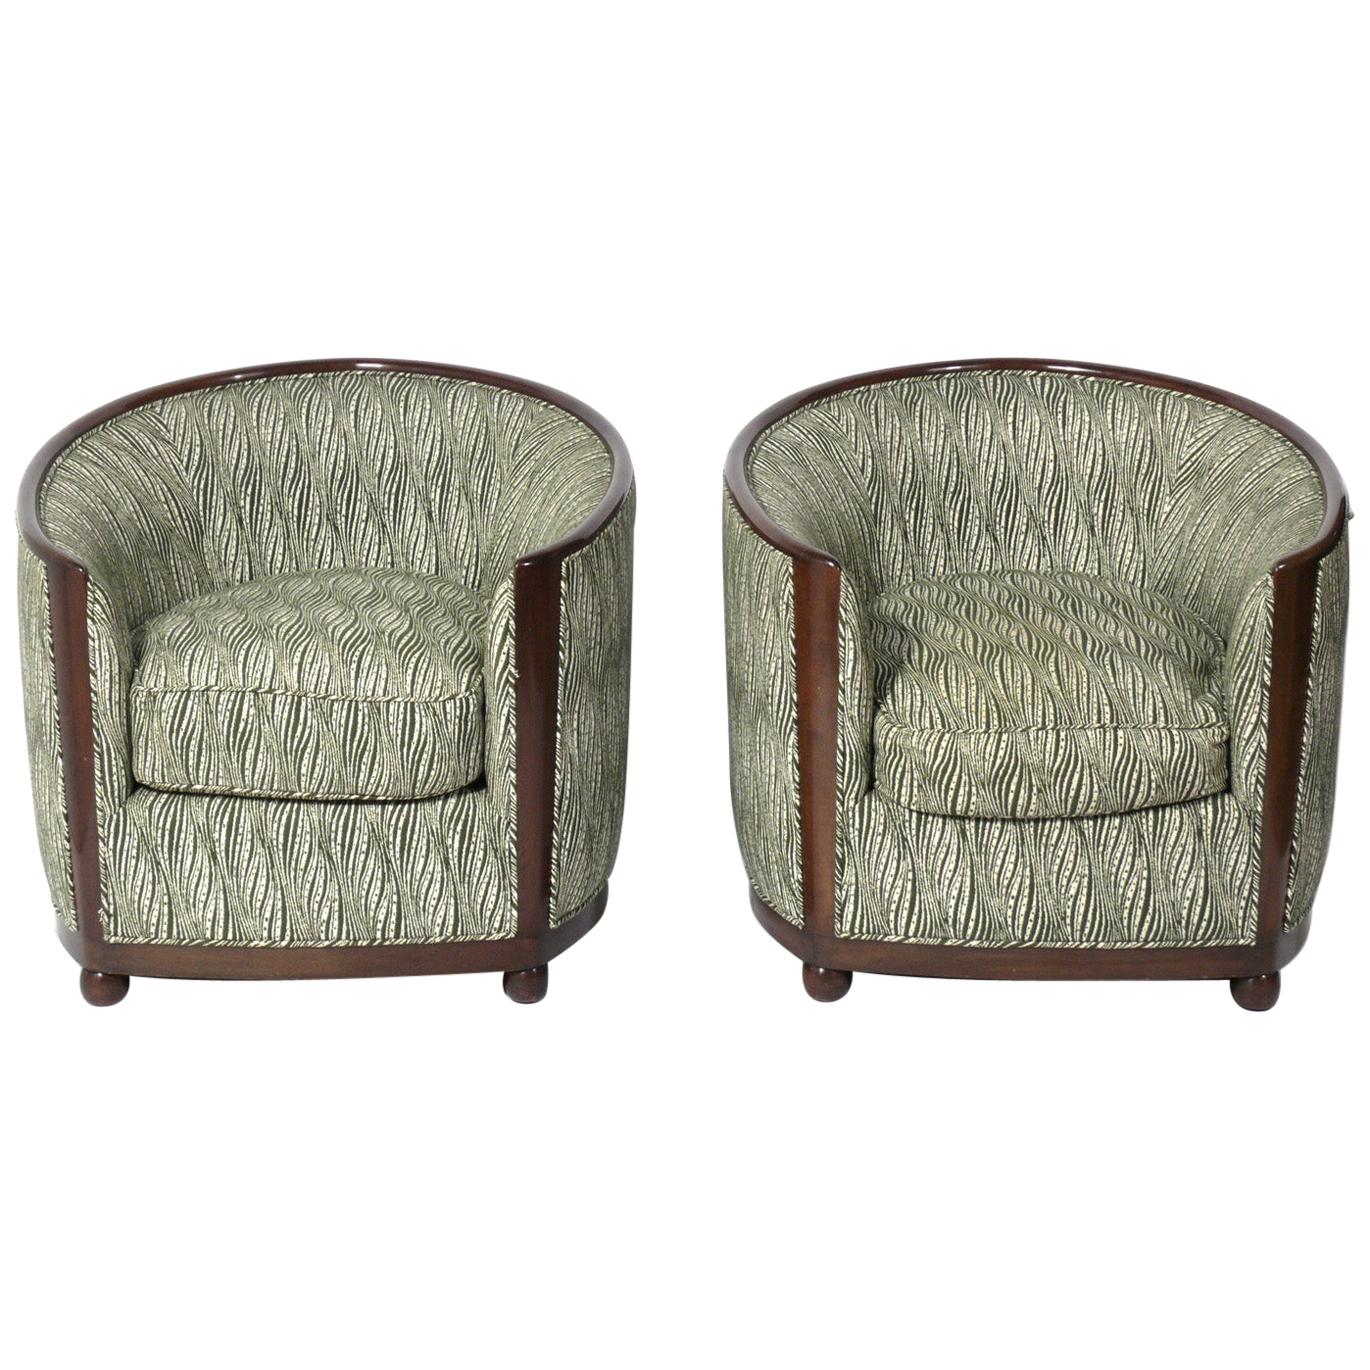 Pair of Art Deco Style Tub Chairs